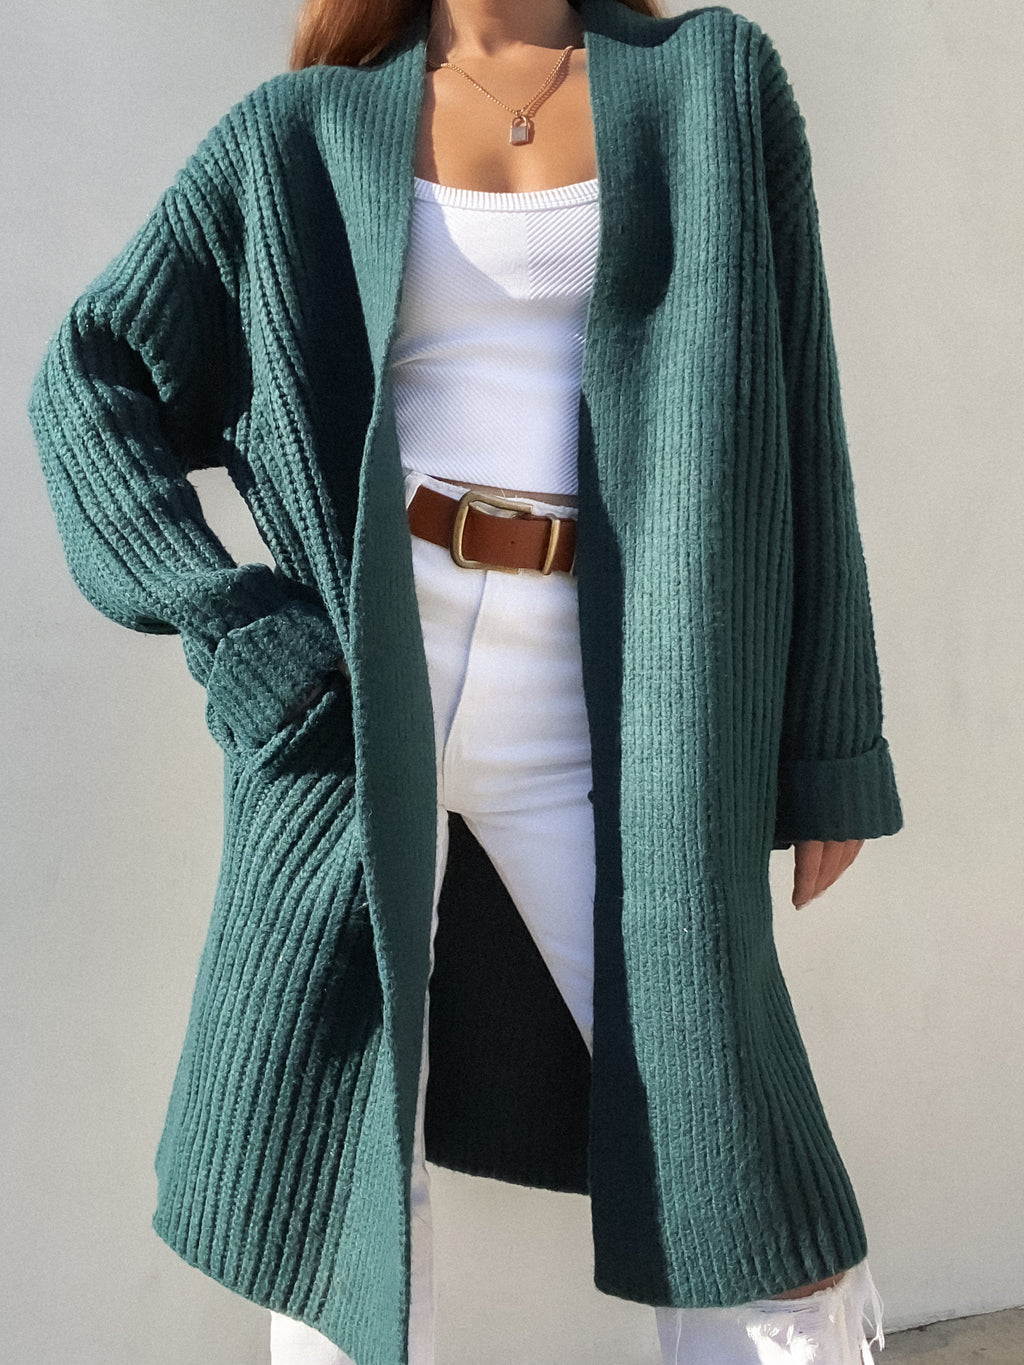 Adley Knit Cardigan in Peacock - Final Sale - Stitch And Feather